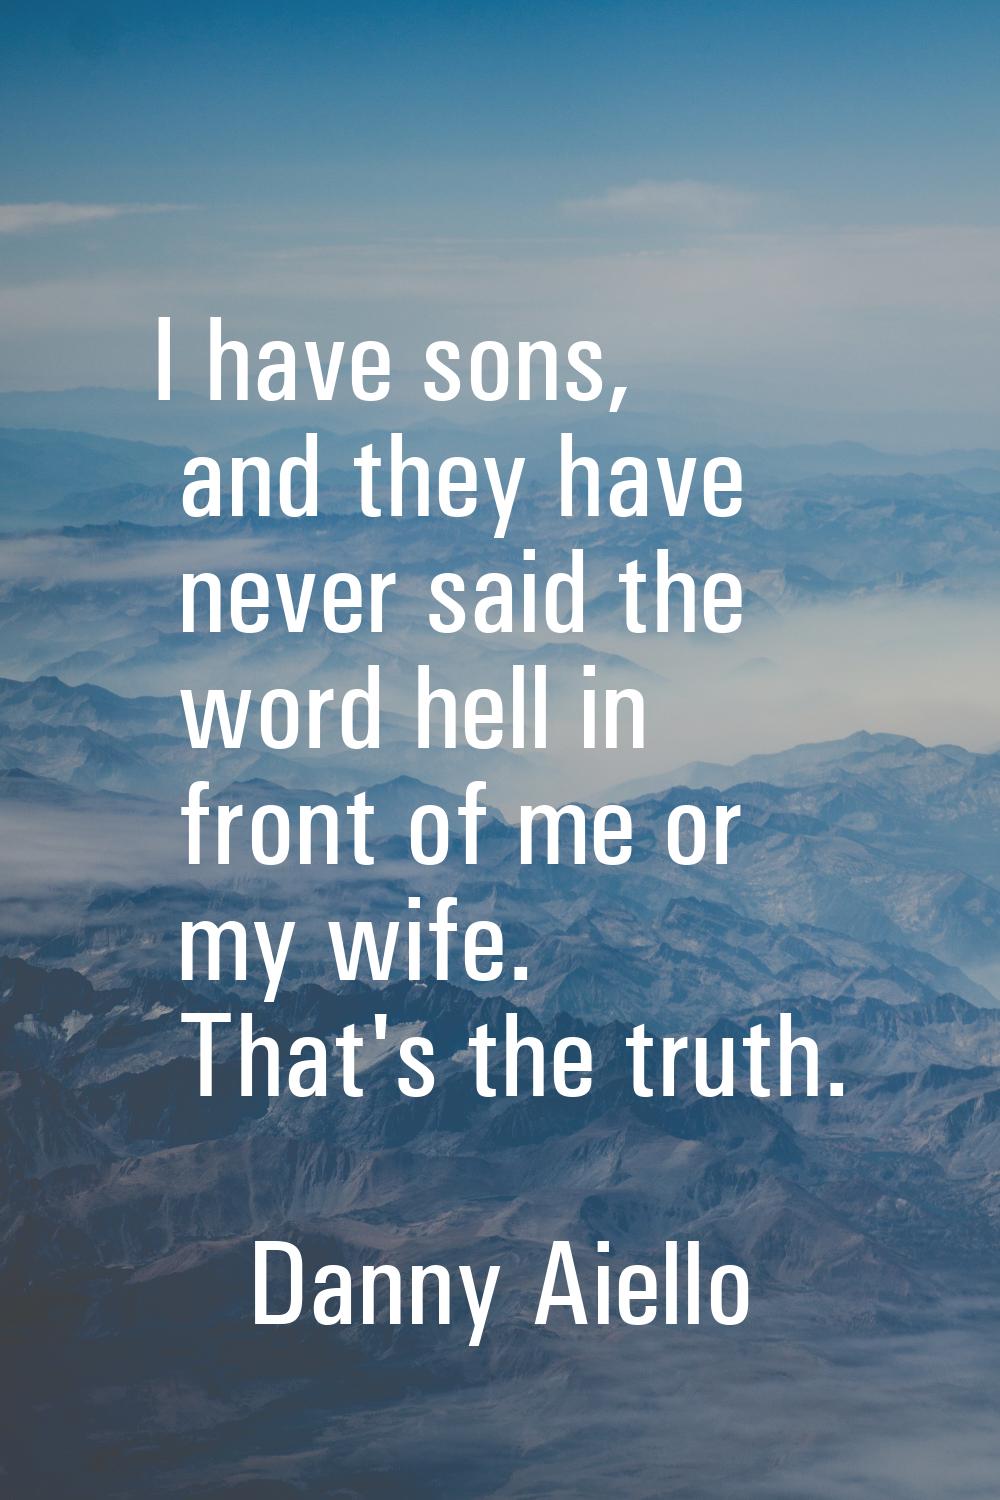 I have sons, and they have never said the word hell in front of me or my wife. That's the truth.